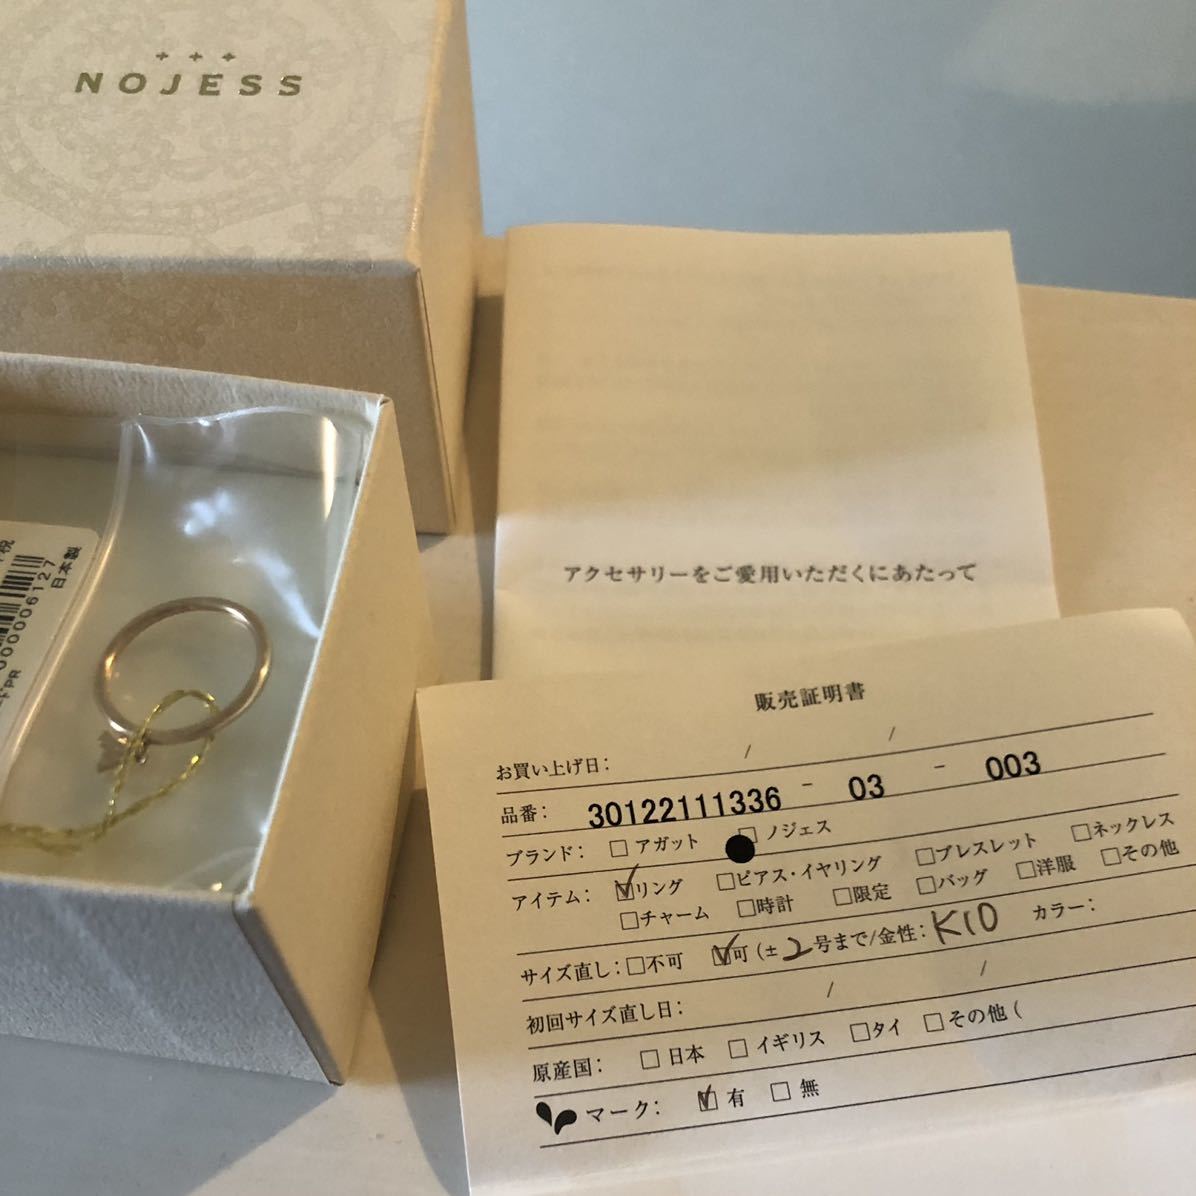 NOJESS Nojess small bird bird .. main is totsubame pin key ring 3 number K10 YG Gold new goods unused BOX entering agete liking . person also *